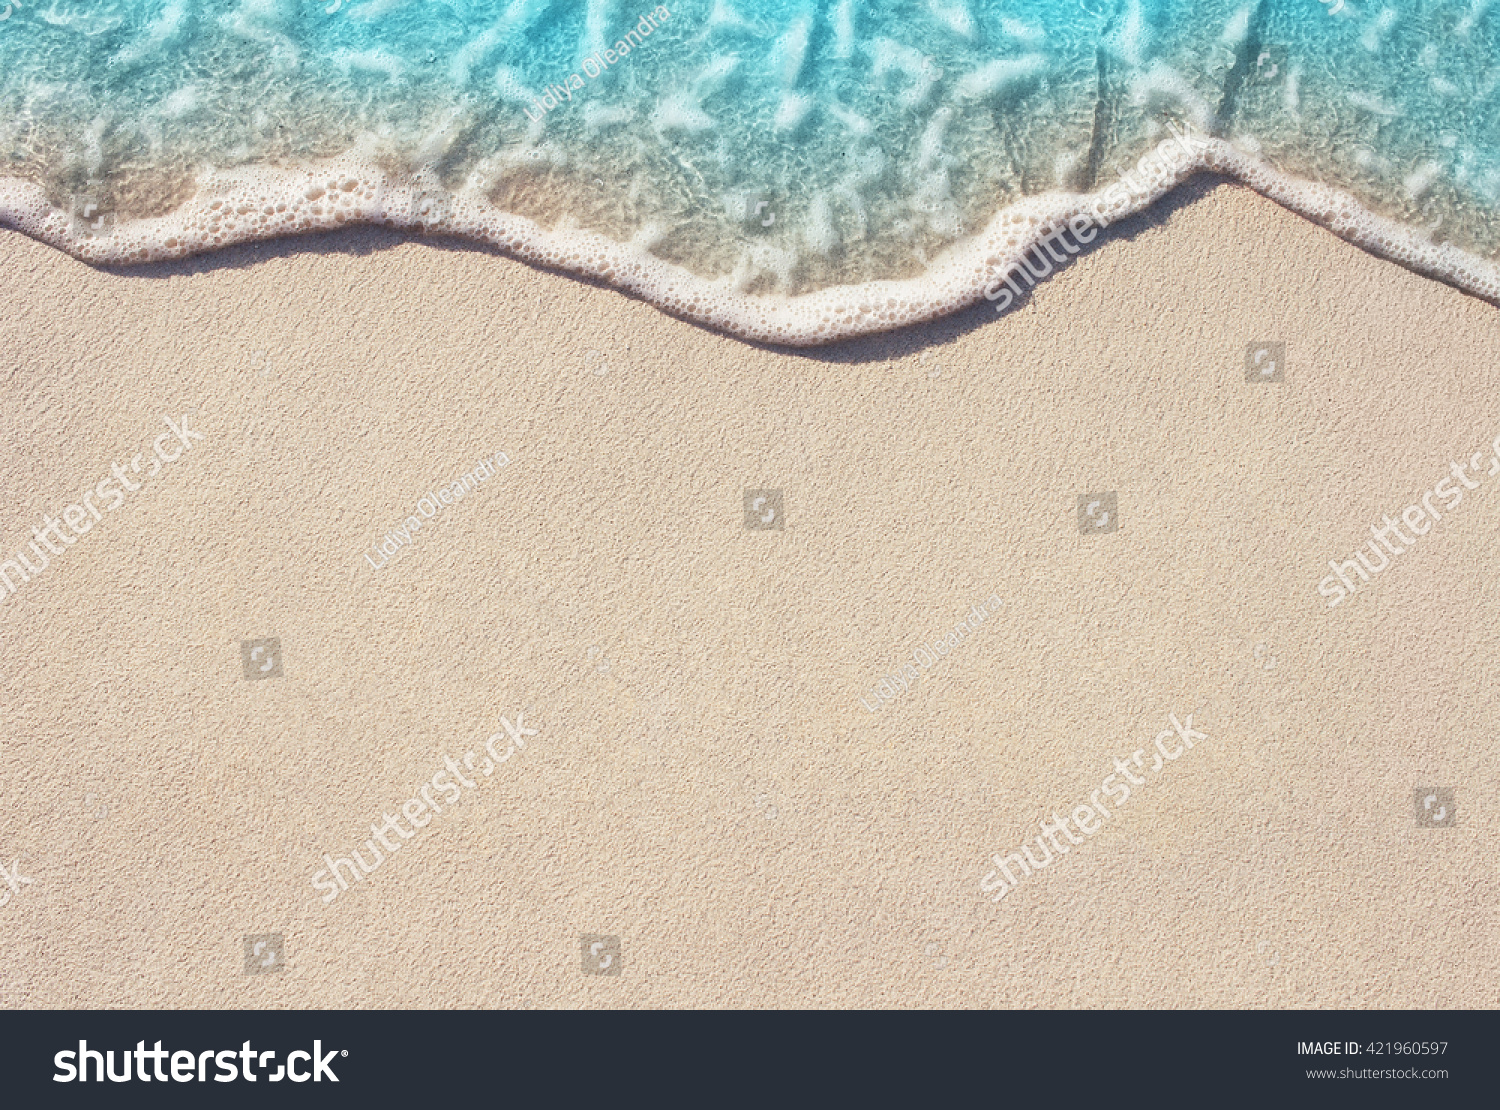 Soft Wave Of Blue Ocean On Sandy Beach. Background. Selective focus. #421960597